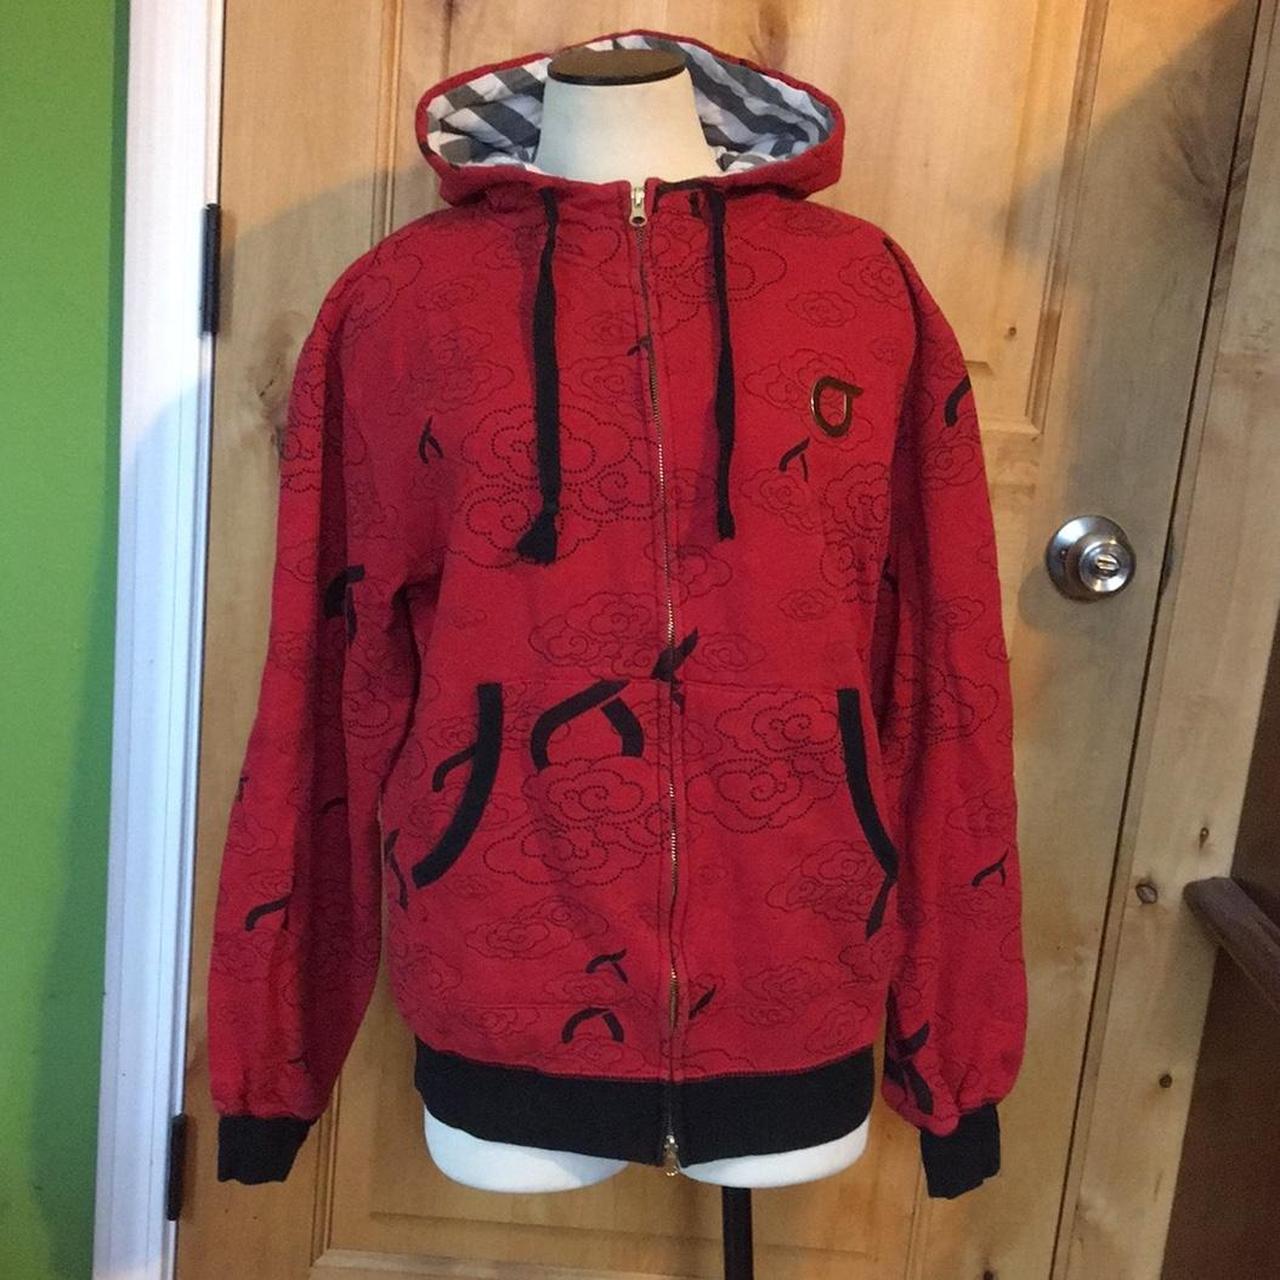 Hype Men's Red and Black Hoodie